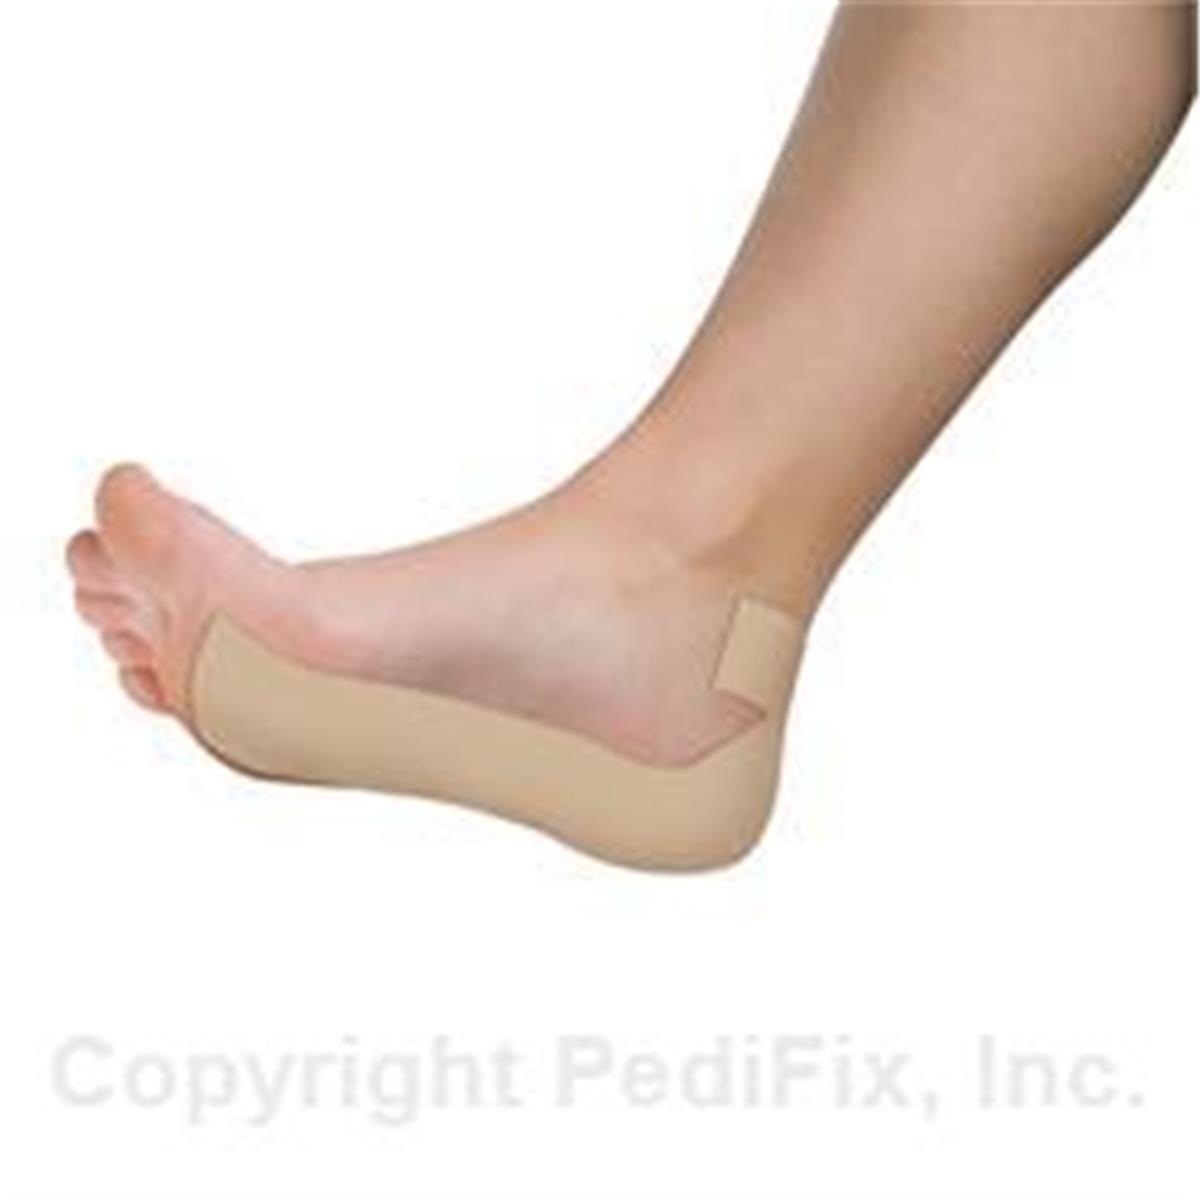 P6060 Plantar Fasciitis Relief Strips, One Size - 7 Per Pack